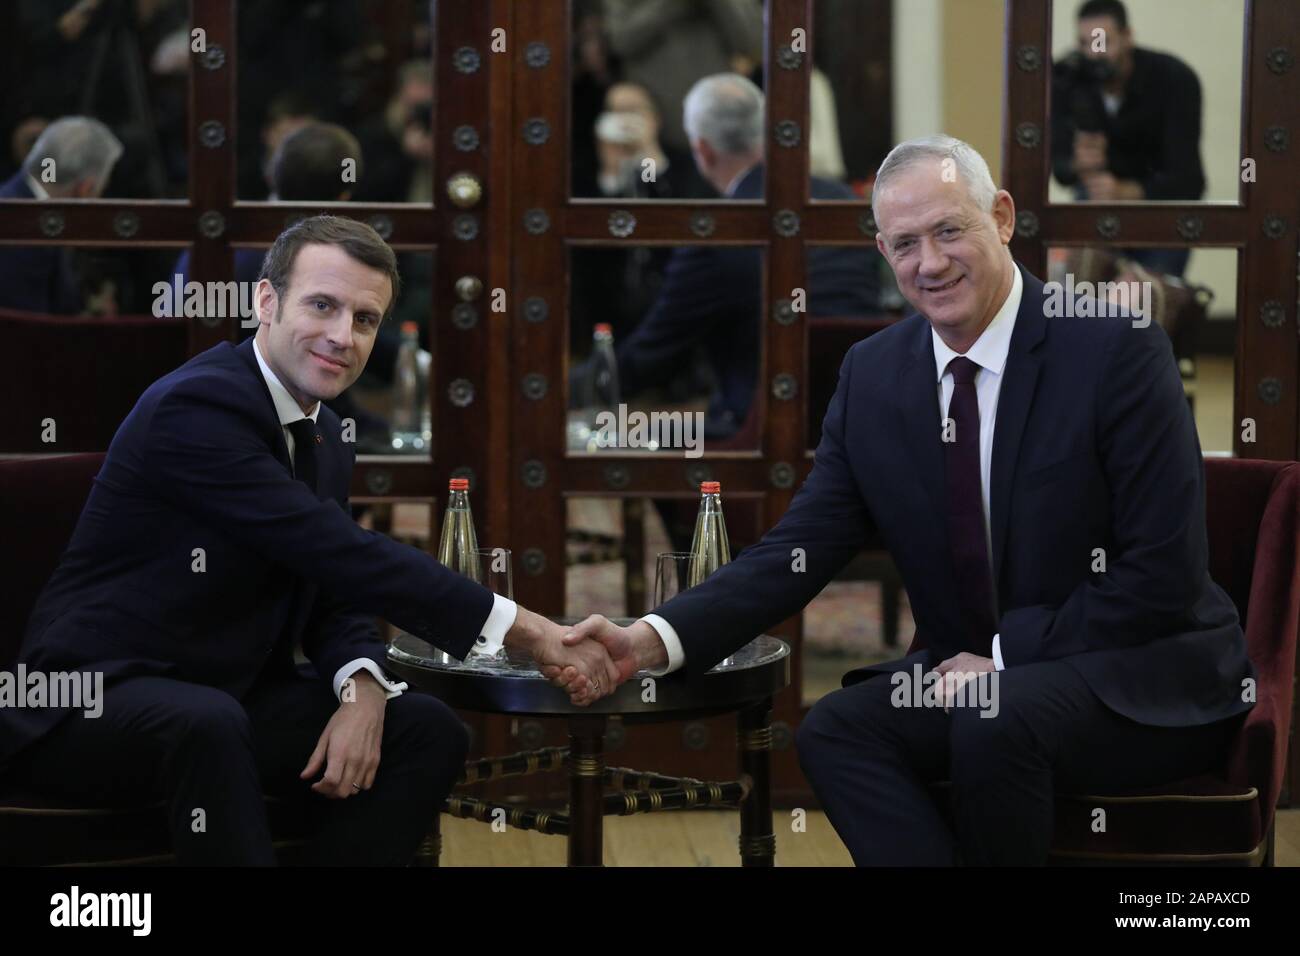 Jerusalem, Israel. 22nd Jan, 2020. French President Emmanuel Macron meets with Blue and White Party leader Benny Gantz ahead of the Fifth World Holocaust Forum at the King David hotel in Jerusalem, Israel, on Wednesday, January 22, 2020. Macron is on a two trip to Israel and the West Bank to discuss the Iran tensions and the Palestinian peace process. Pool Photo by Abil Sultan/UPI Credit: UPI/Alamy Live News Stock Photo